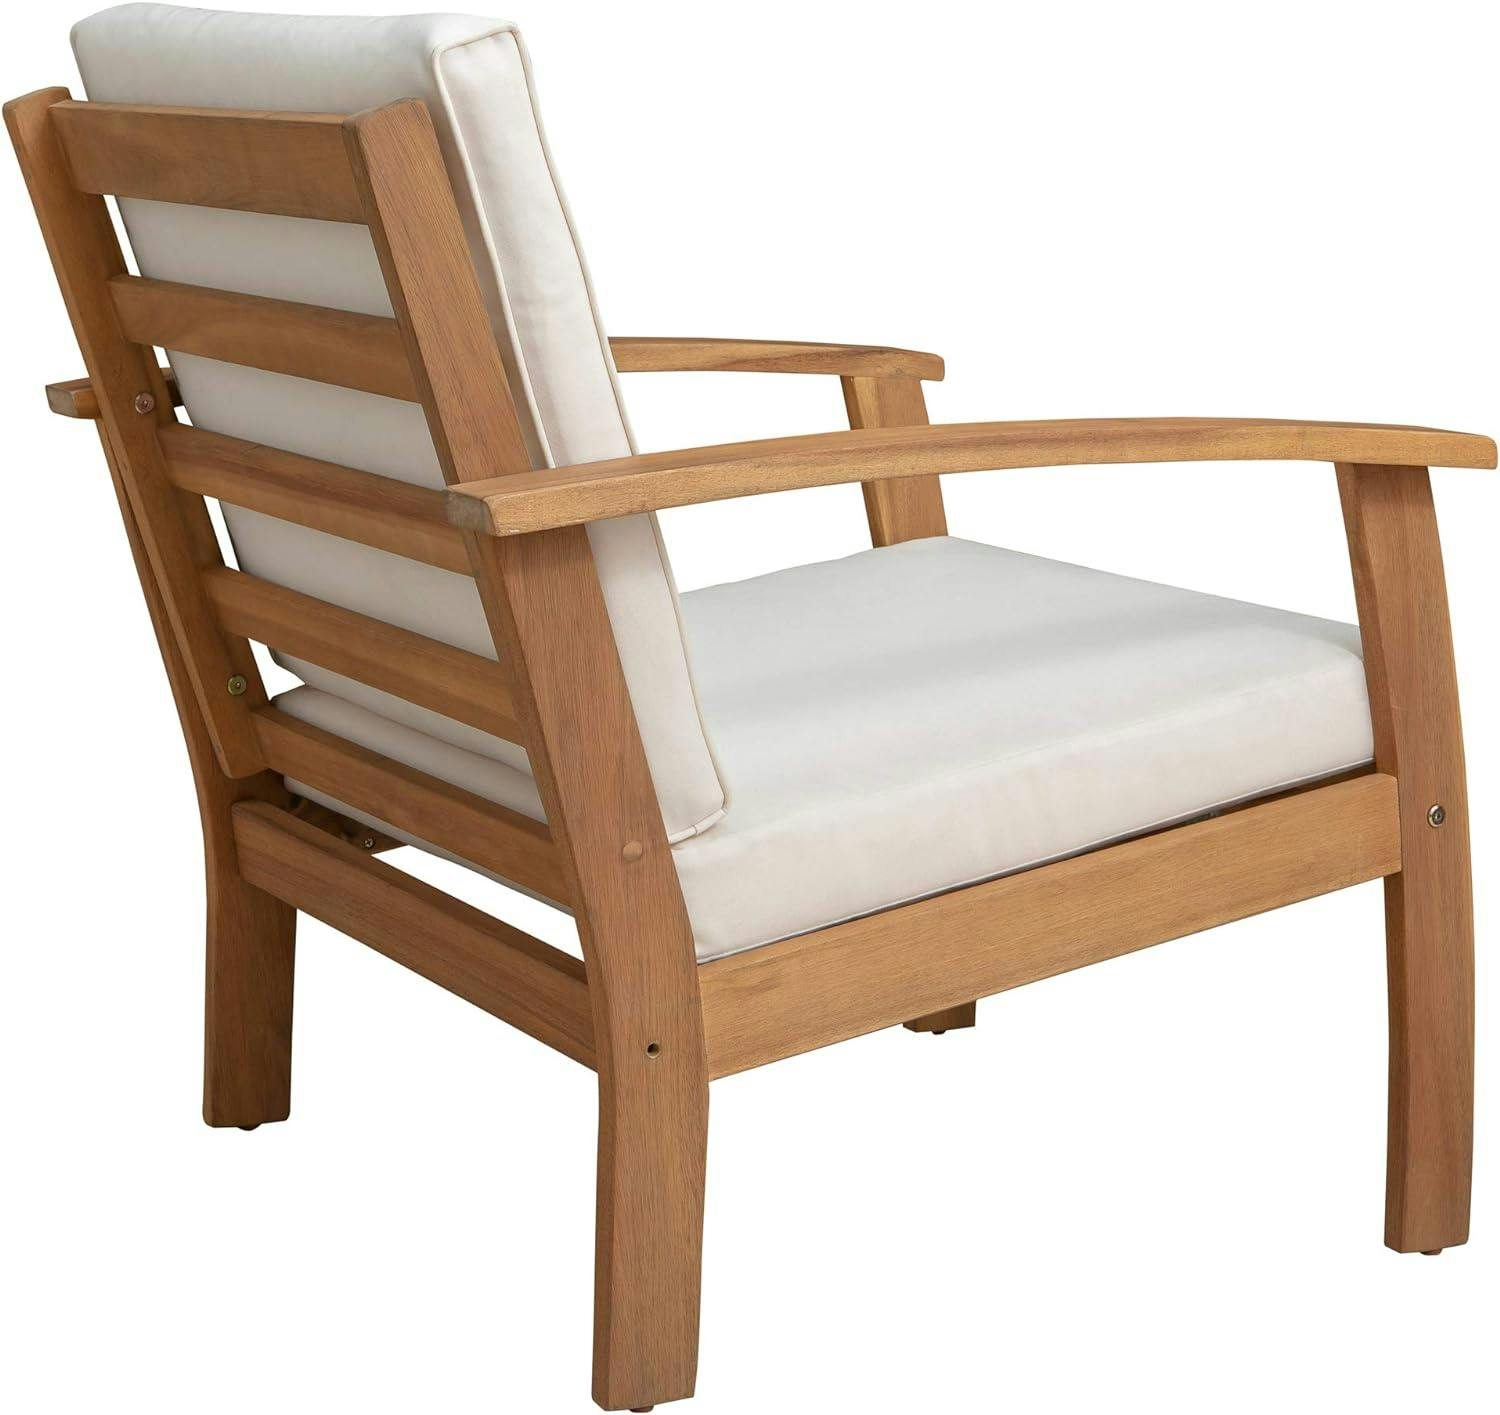 Scandinavian Midcentury Modern Solid Wood Lounge Chair with Cream Cushions